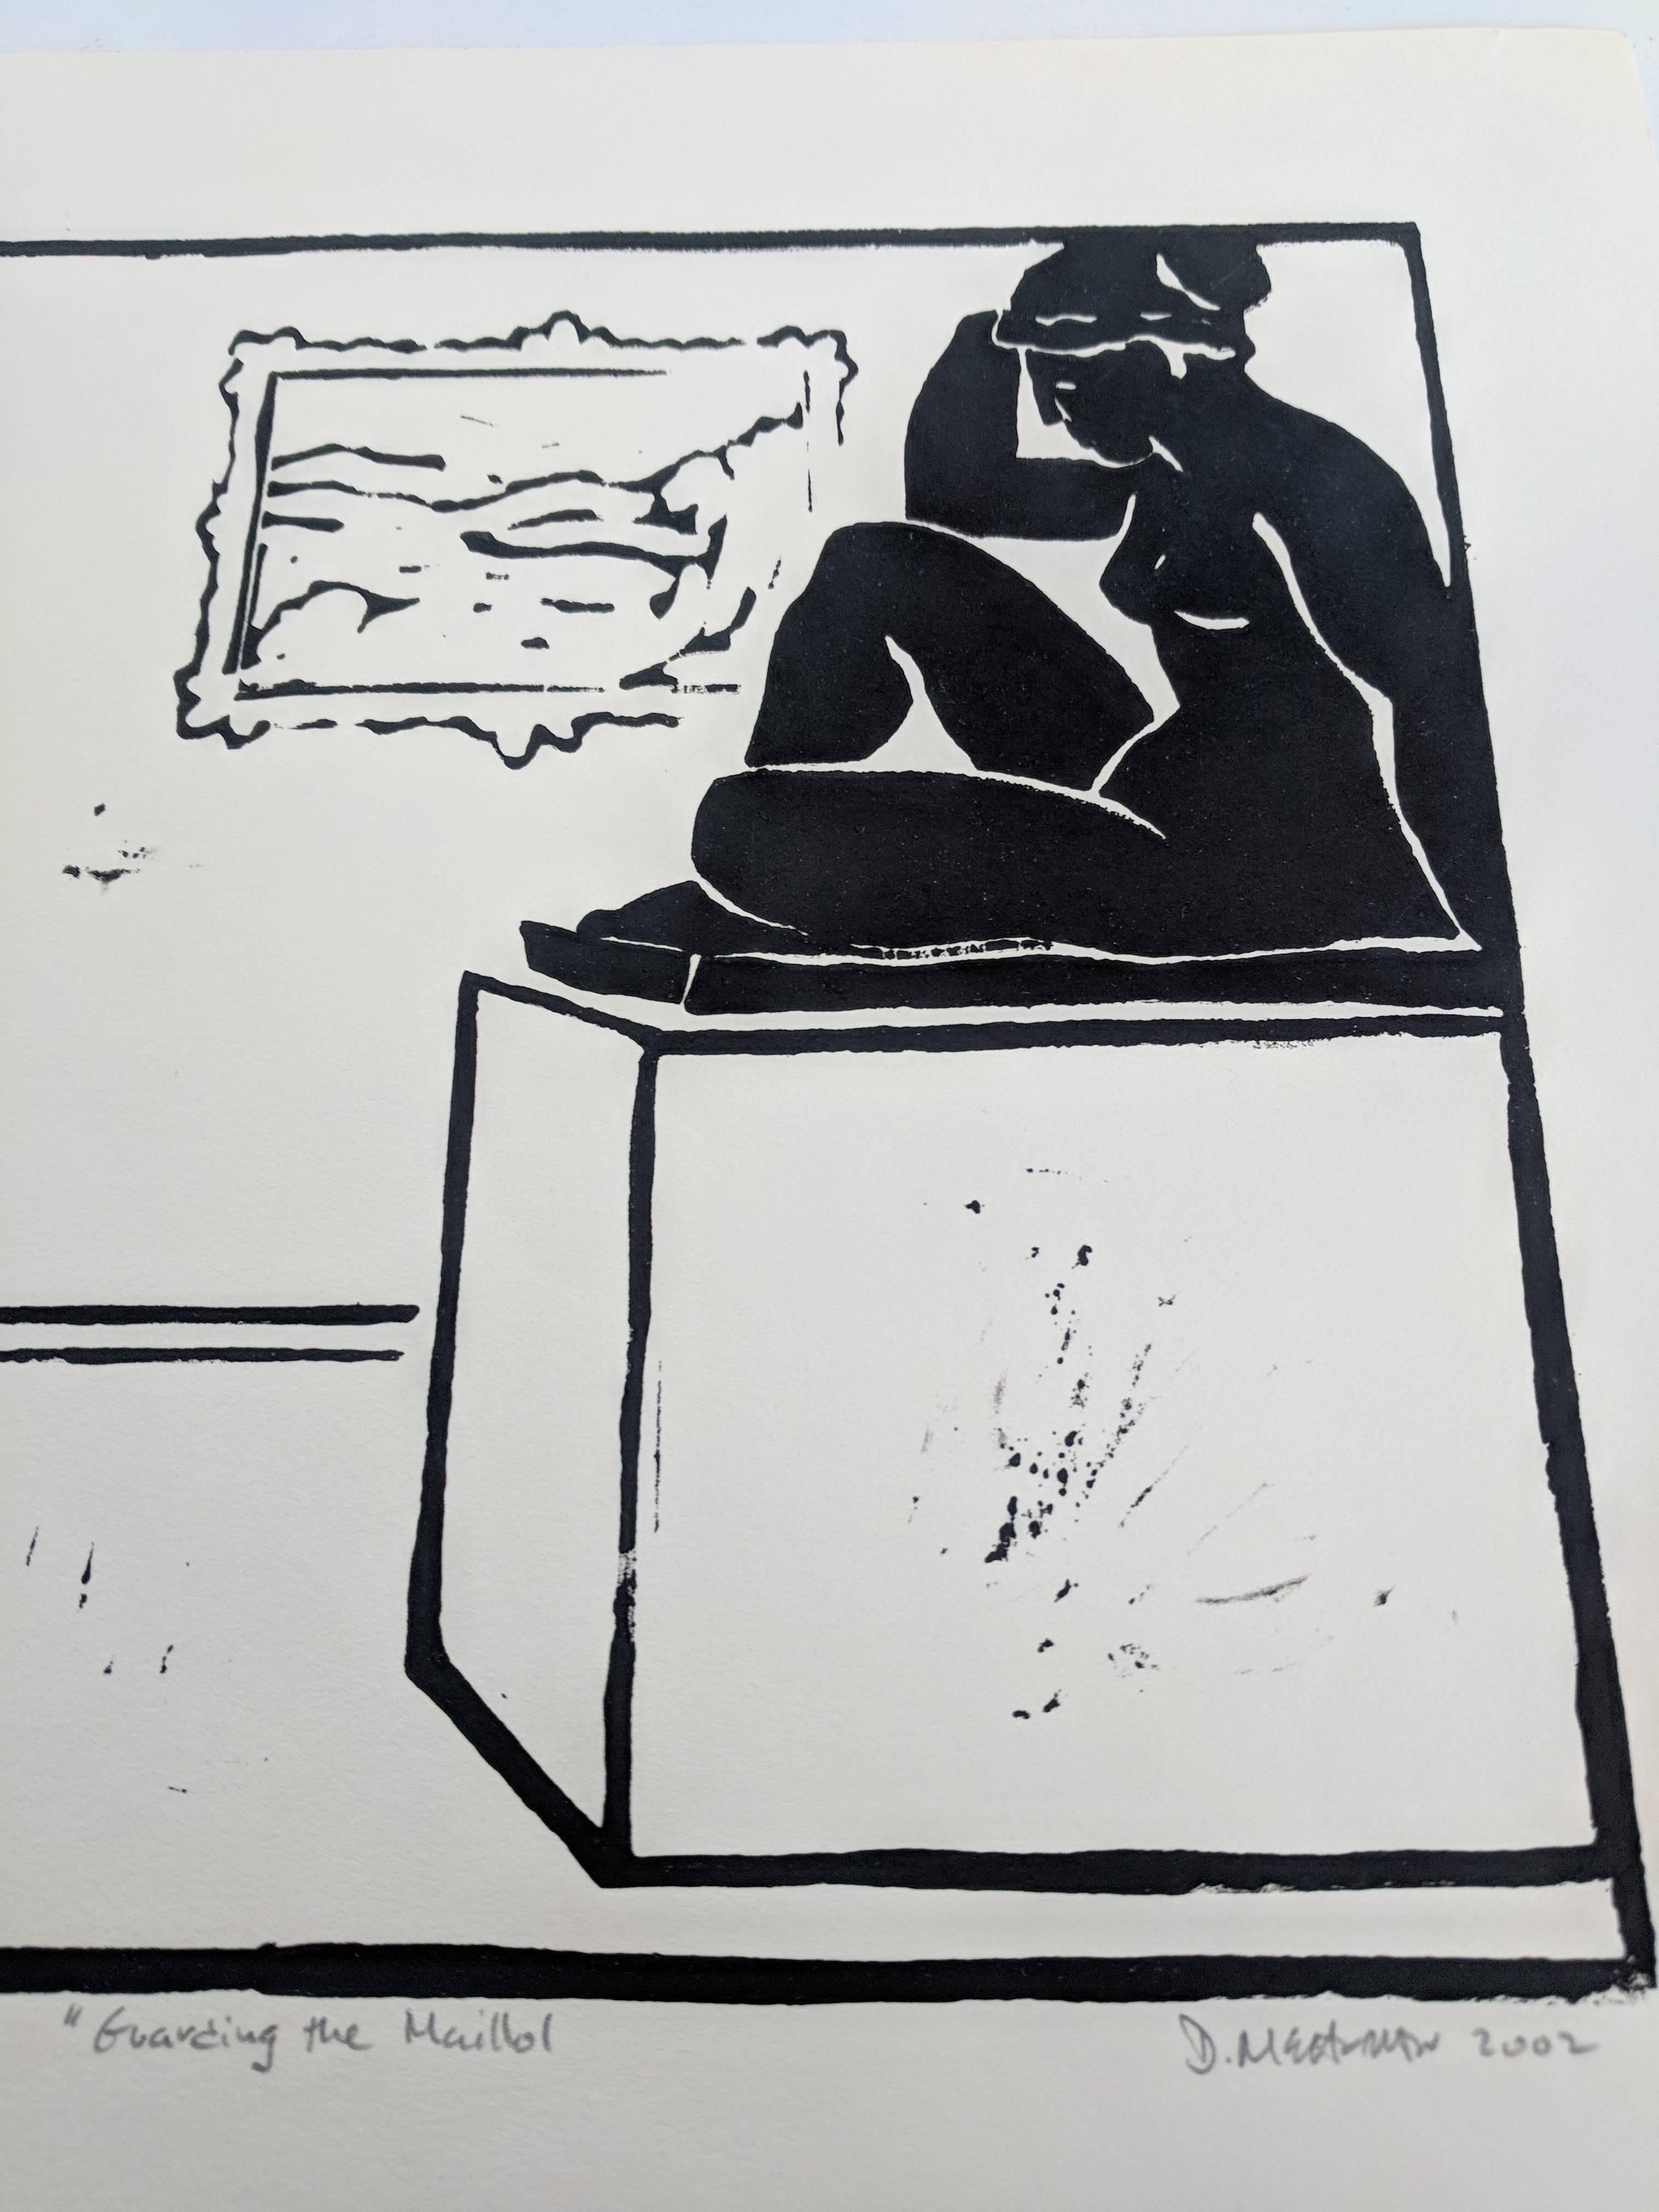 This linocut printed on paper presents a museum guard observing a large sculpture of a woman, in this case, a version of a Maillol sculpture. The version in this linocut is likely based on Aristide Maillol, a French sculptor whose 1905 bronze